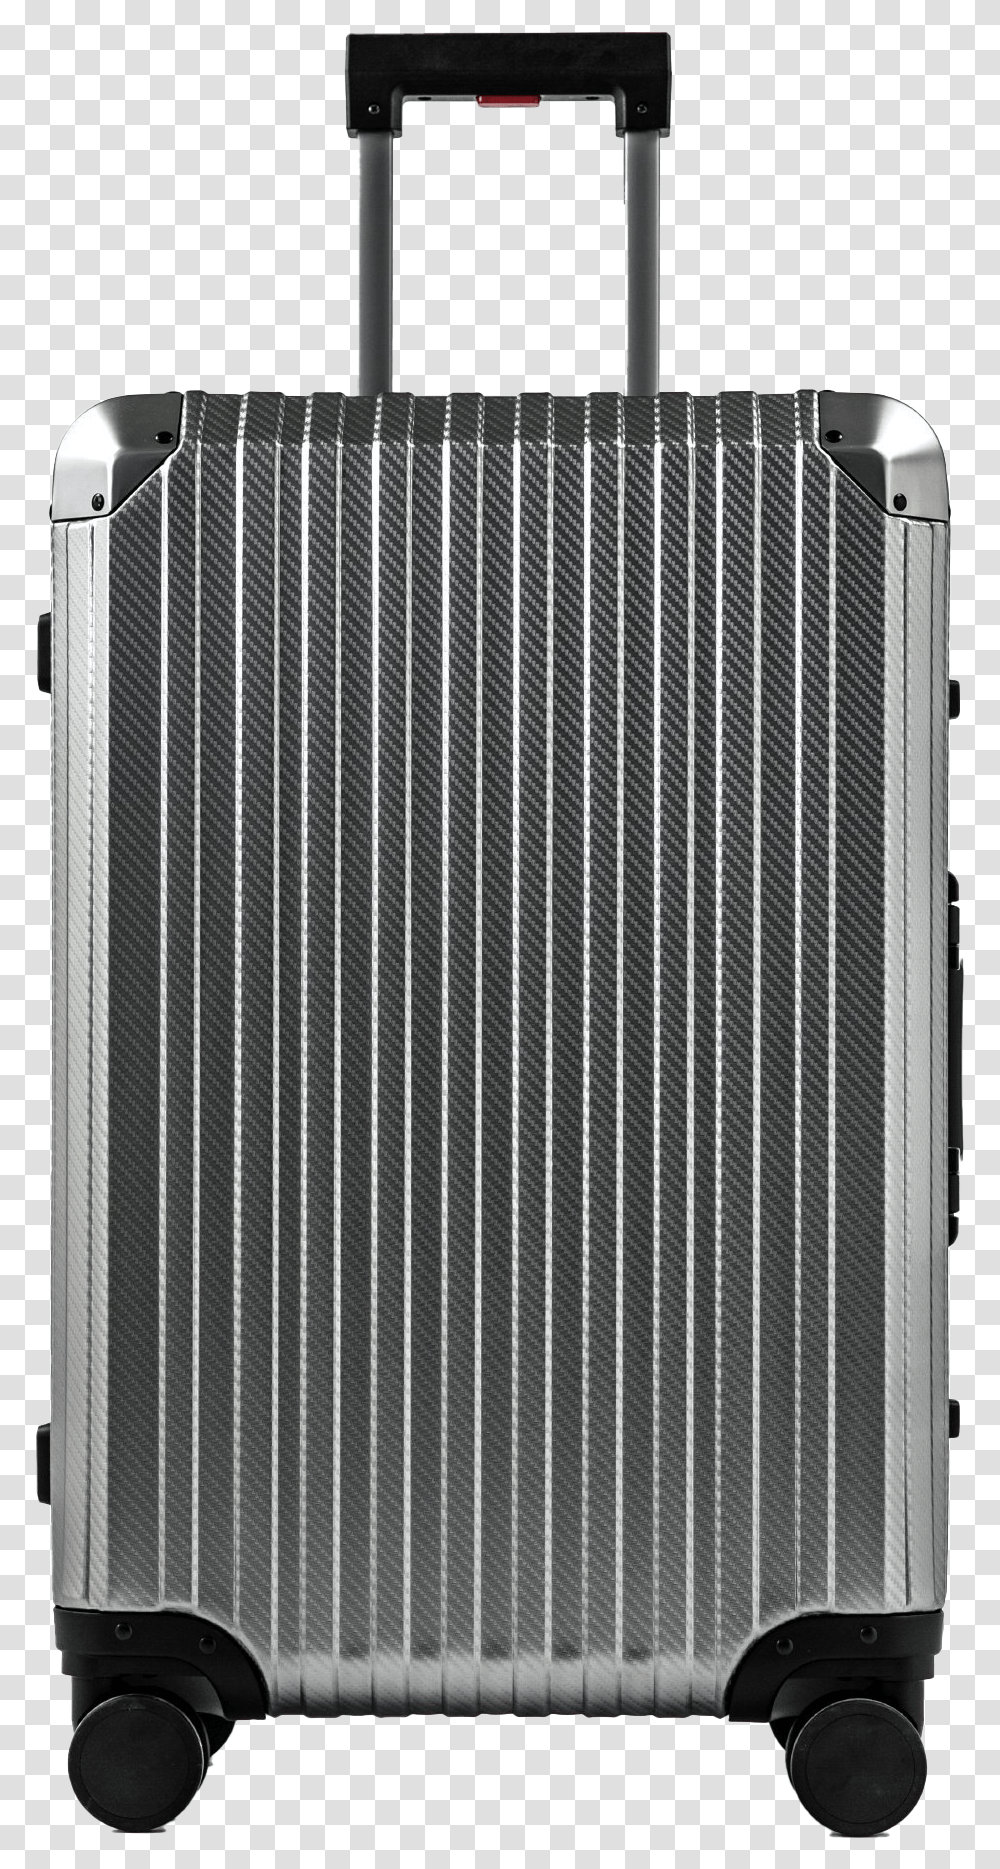 Suitcase Image Suitcase, Radiator, Office Building, Architecture, Grille Transparent Png